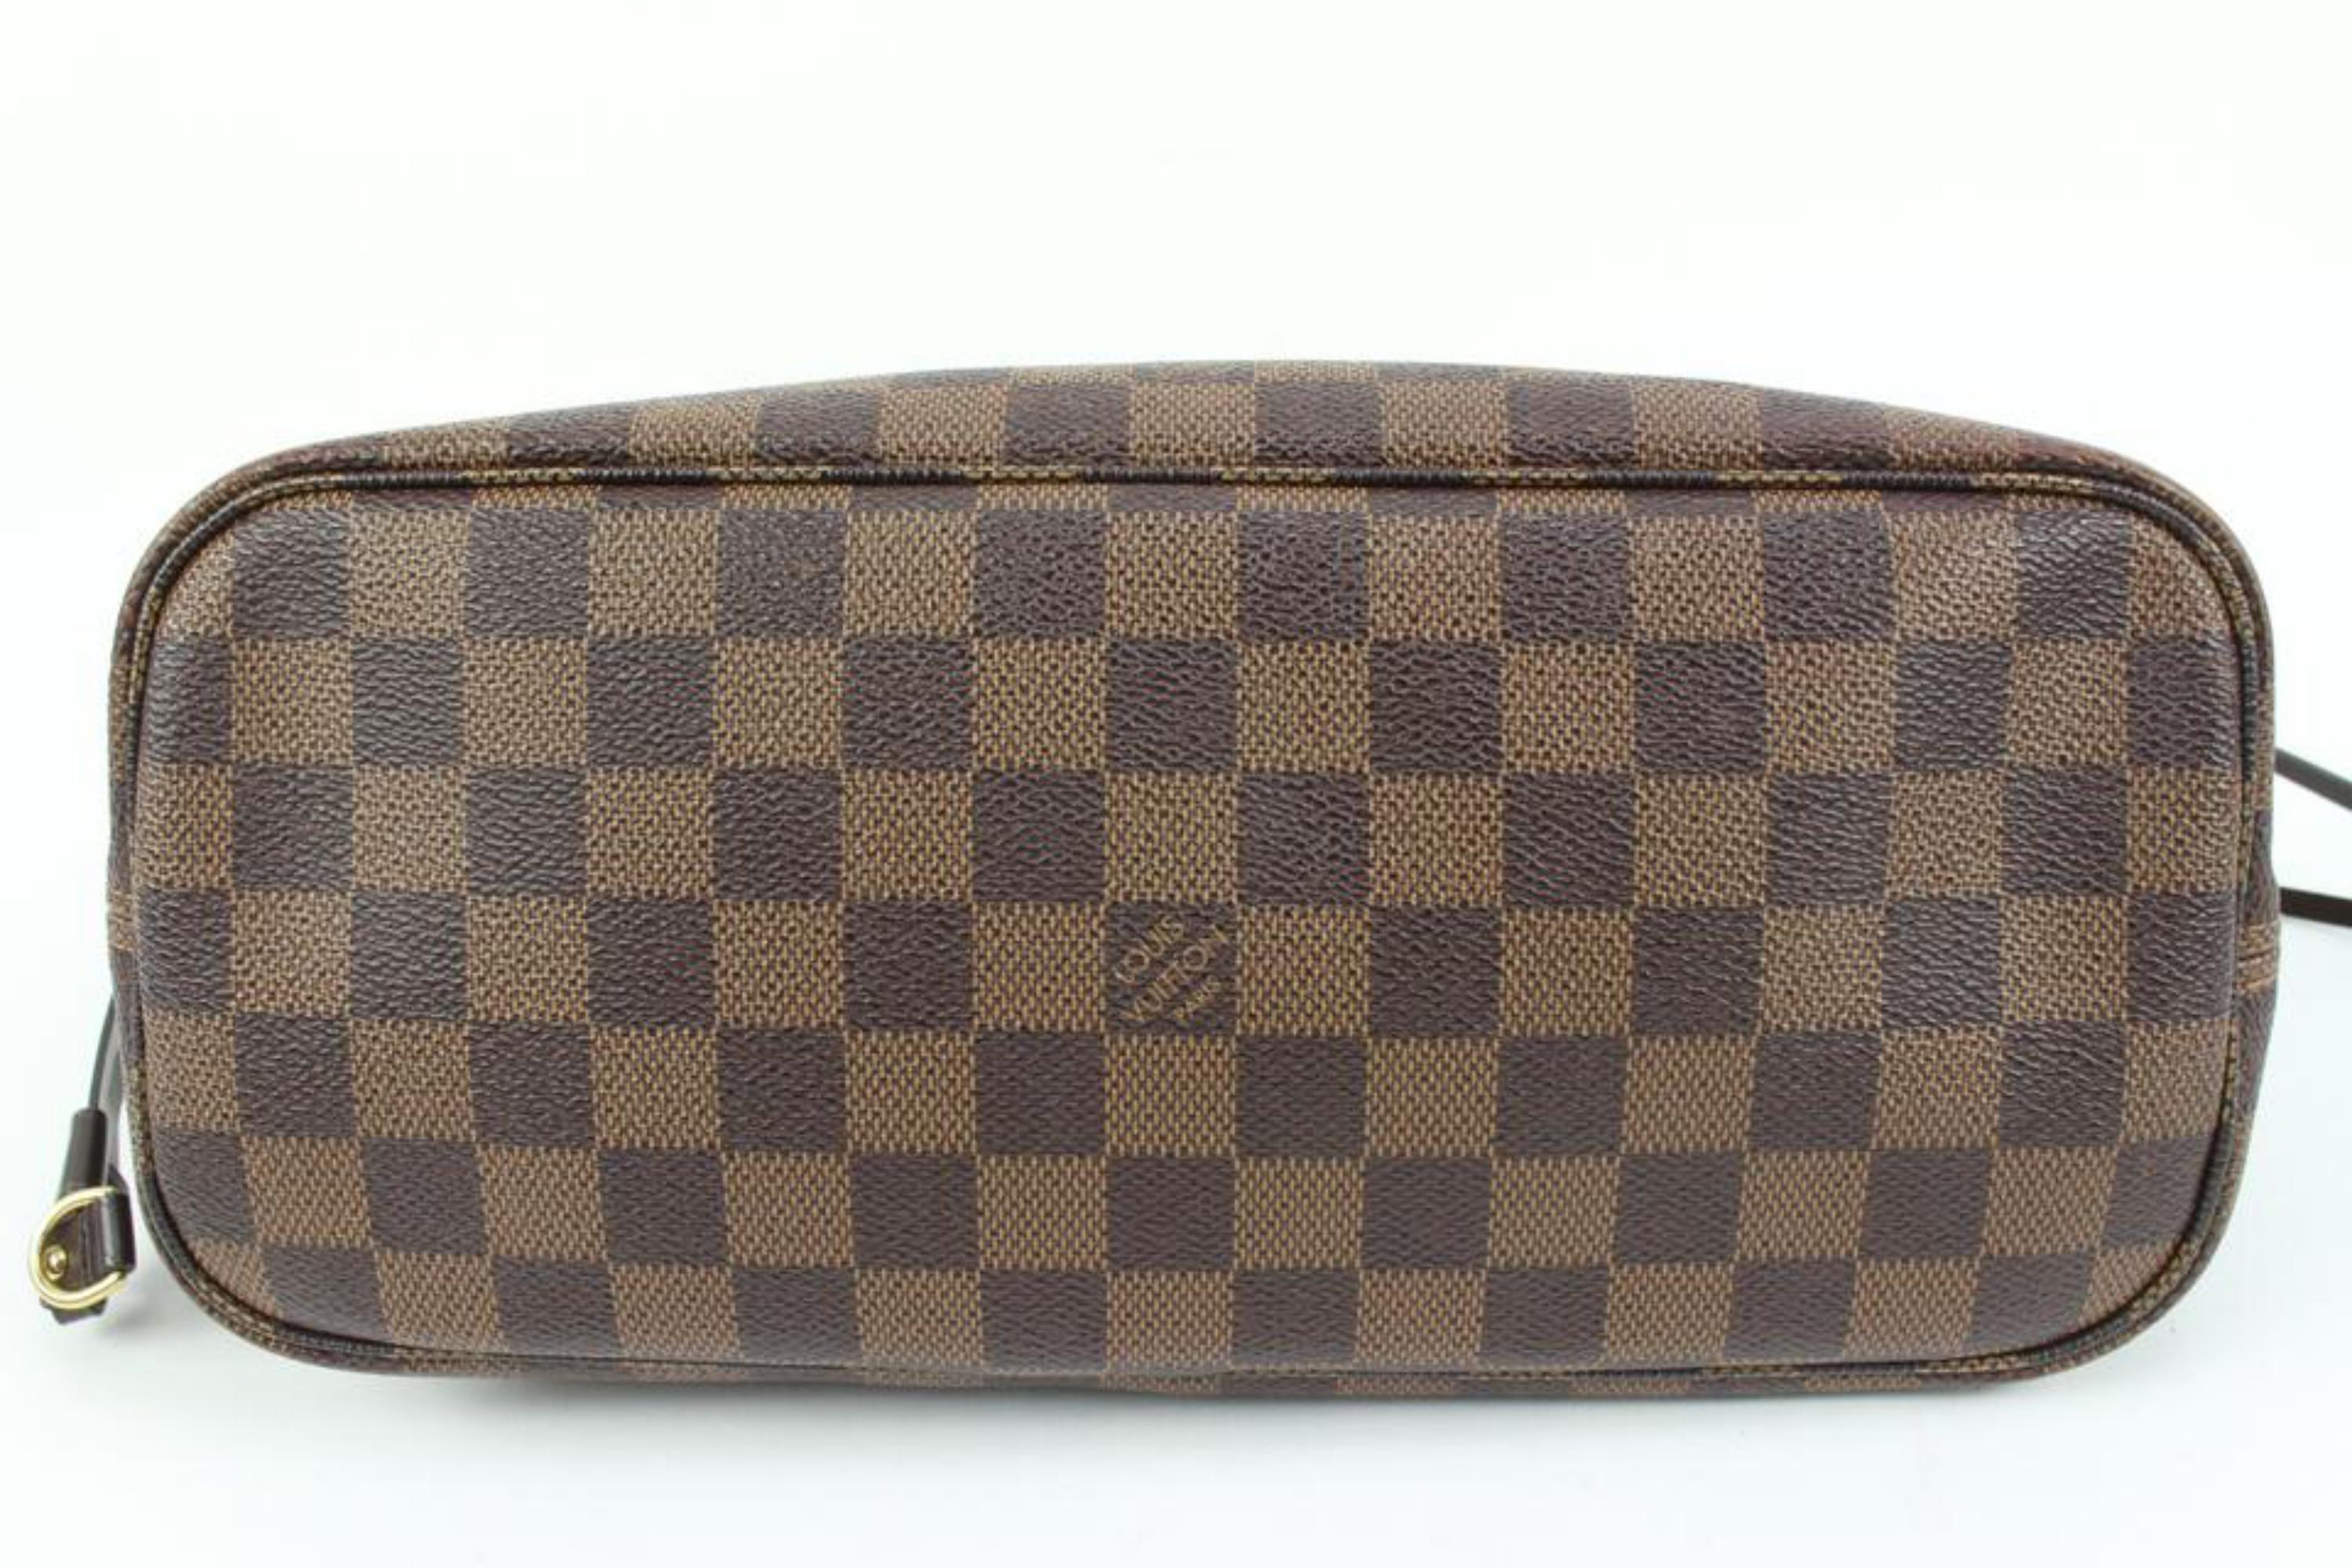 Louis Vuitton Small Damier Ebene Neverfull PM Tote Bag 41lk68 For Sale 4